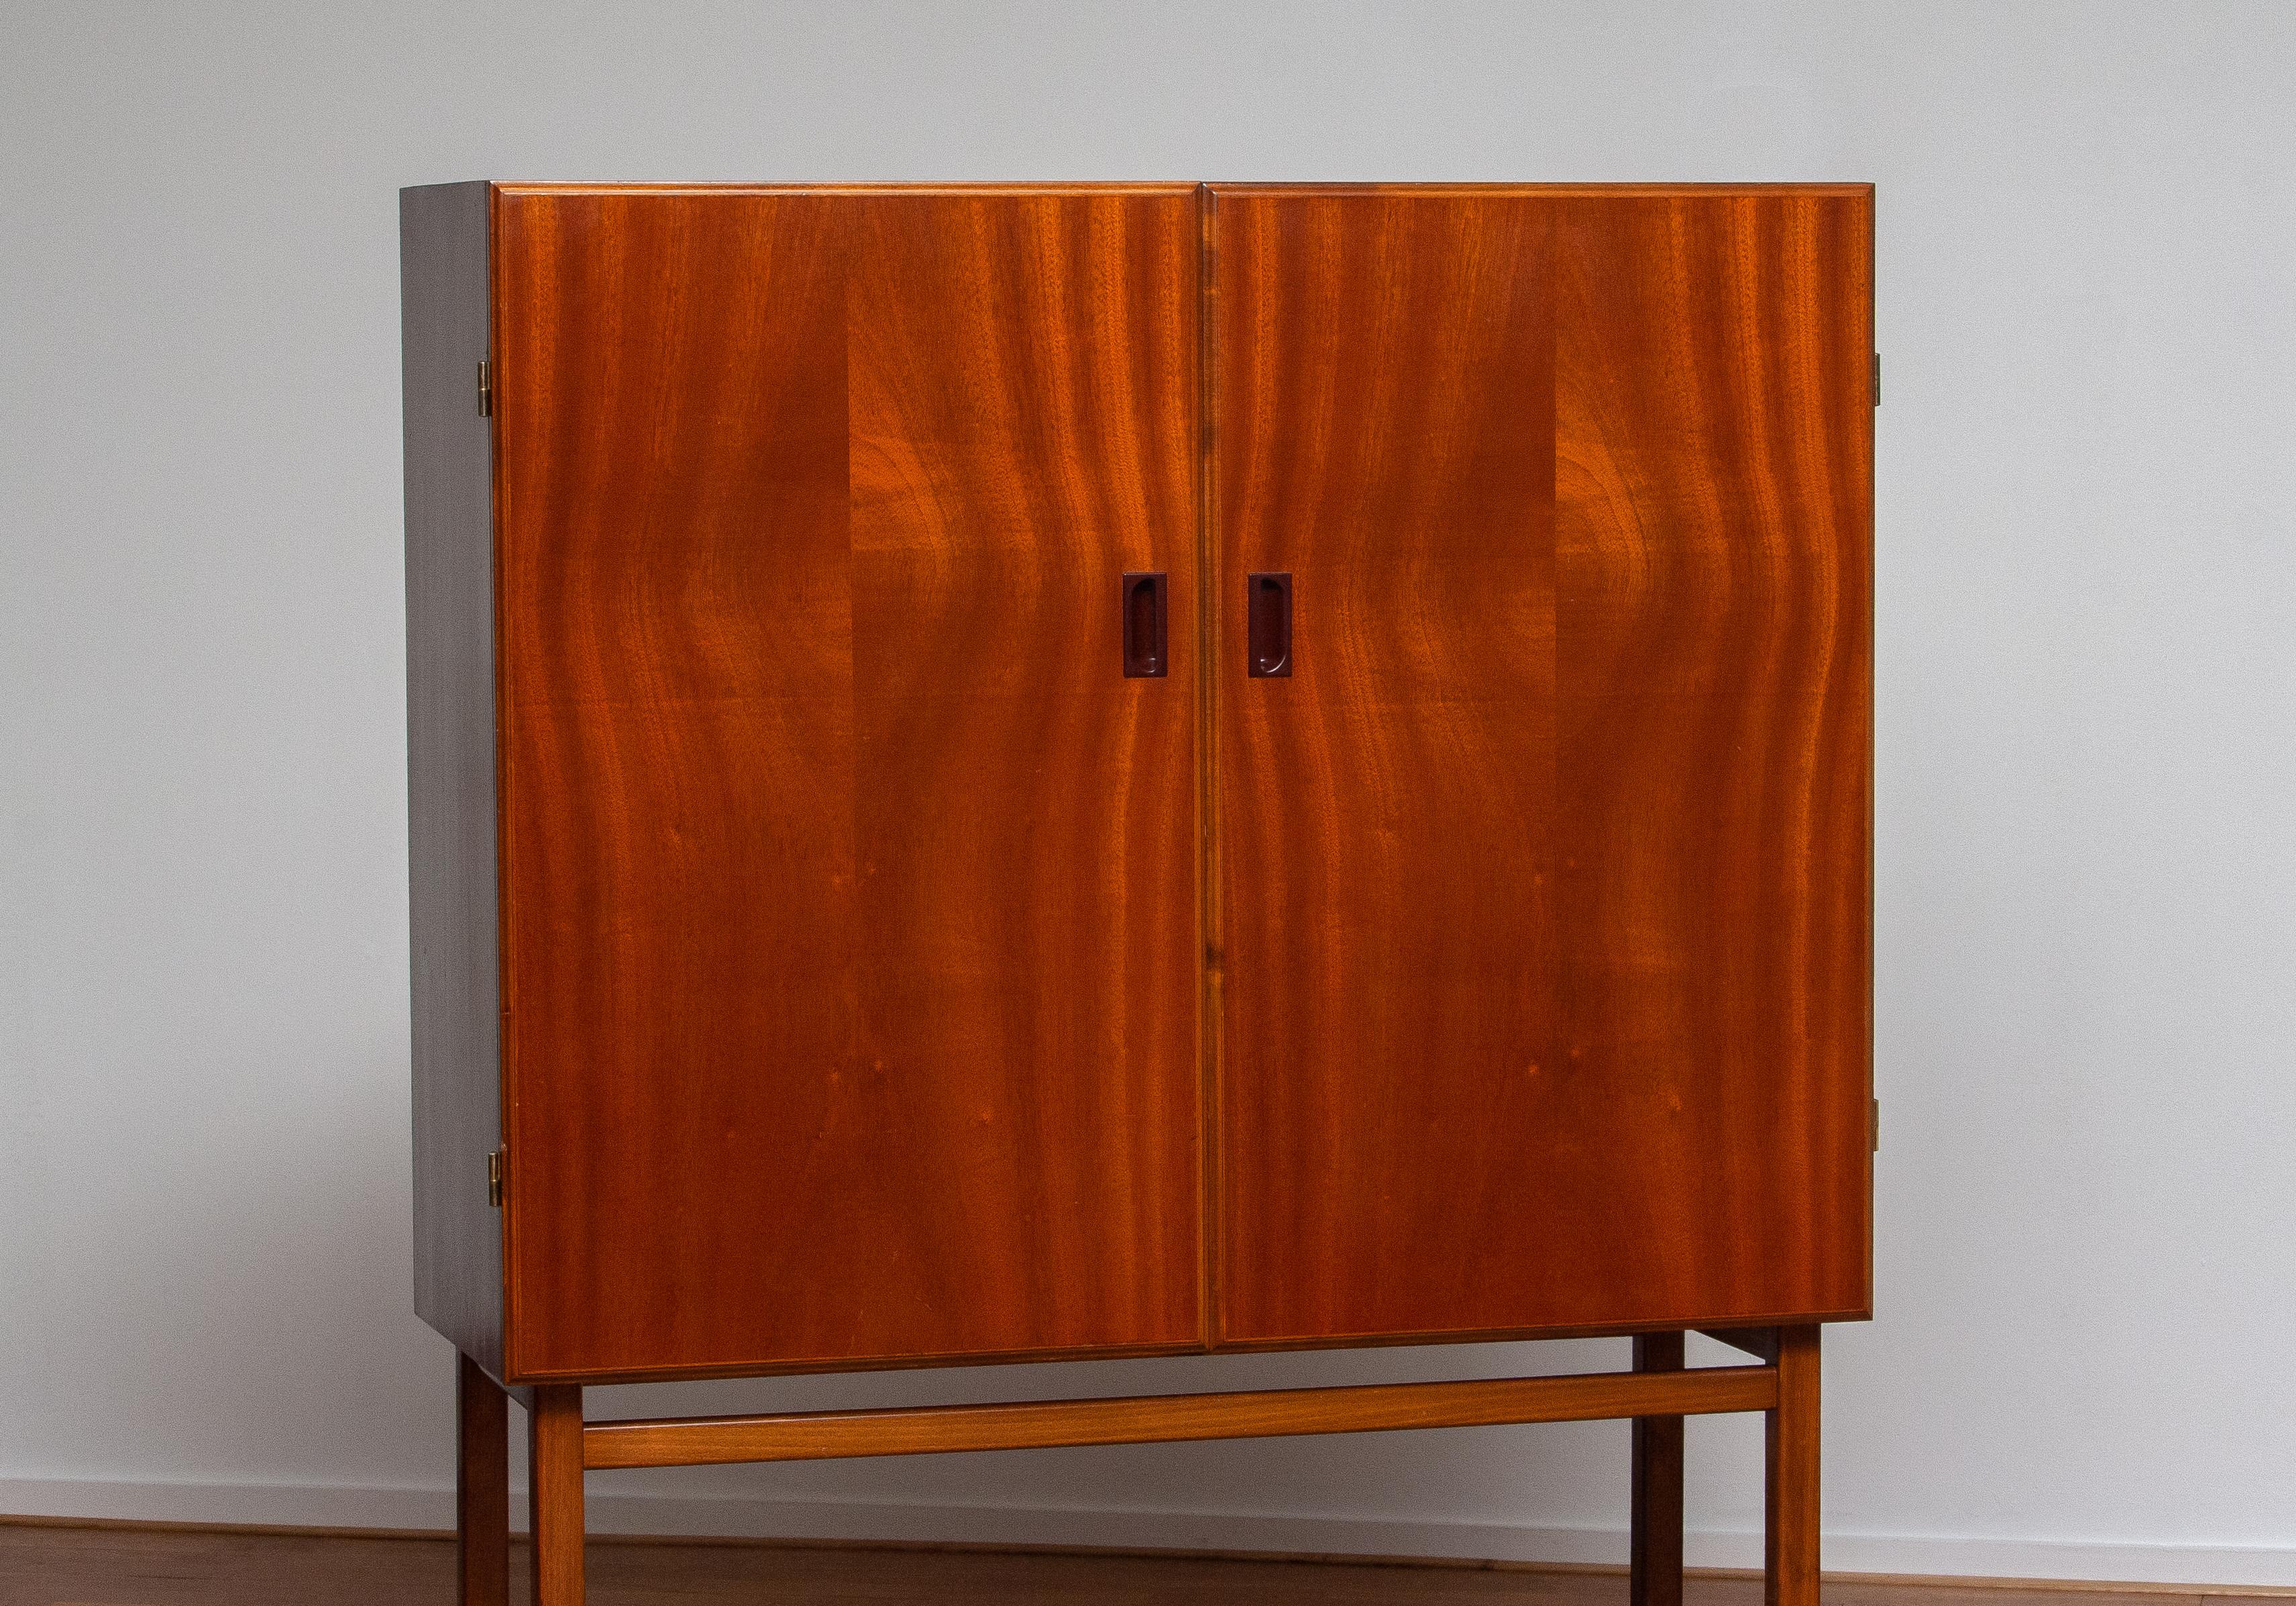 1950s, Slim Midcentury Mahogany Dry Bar / Cabinet by Forenades Mobler, Sweden 1